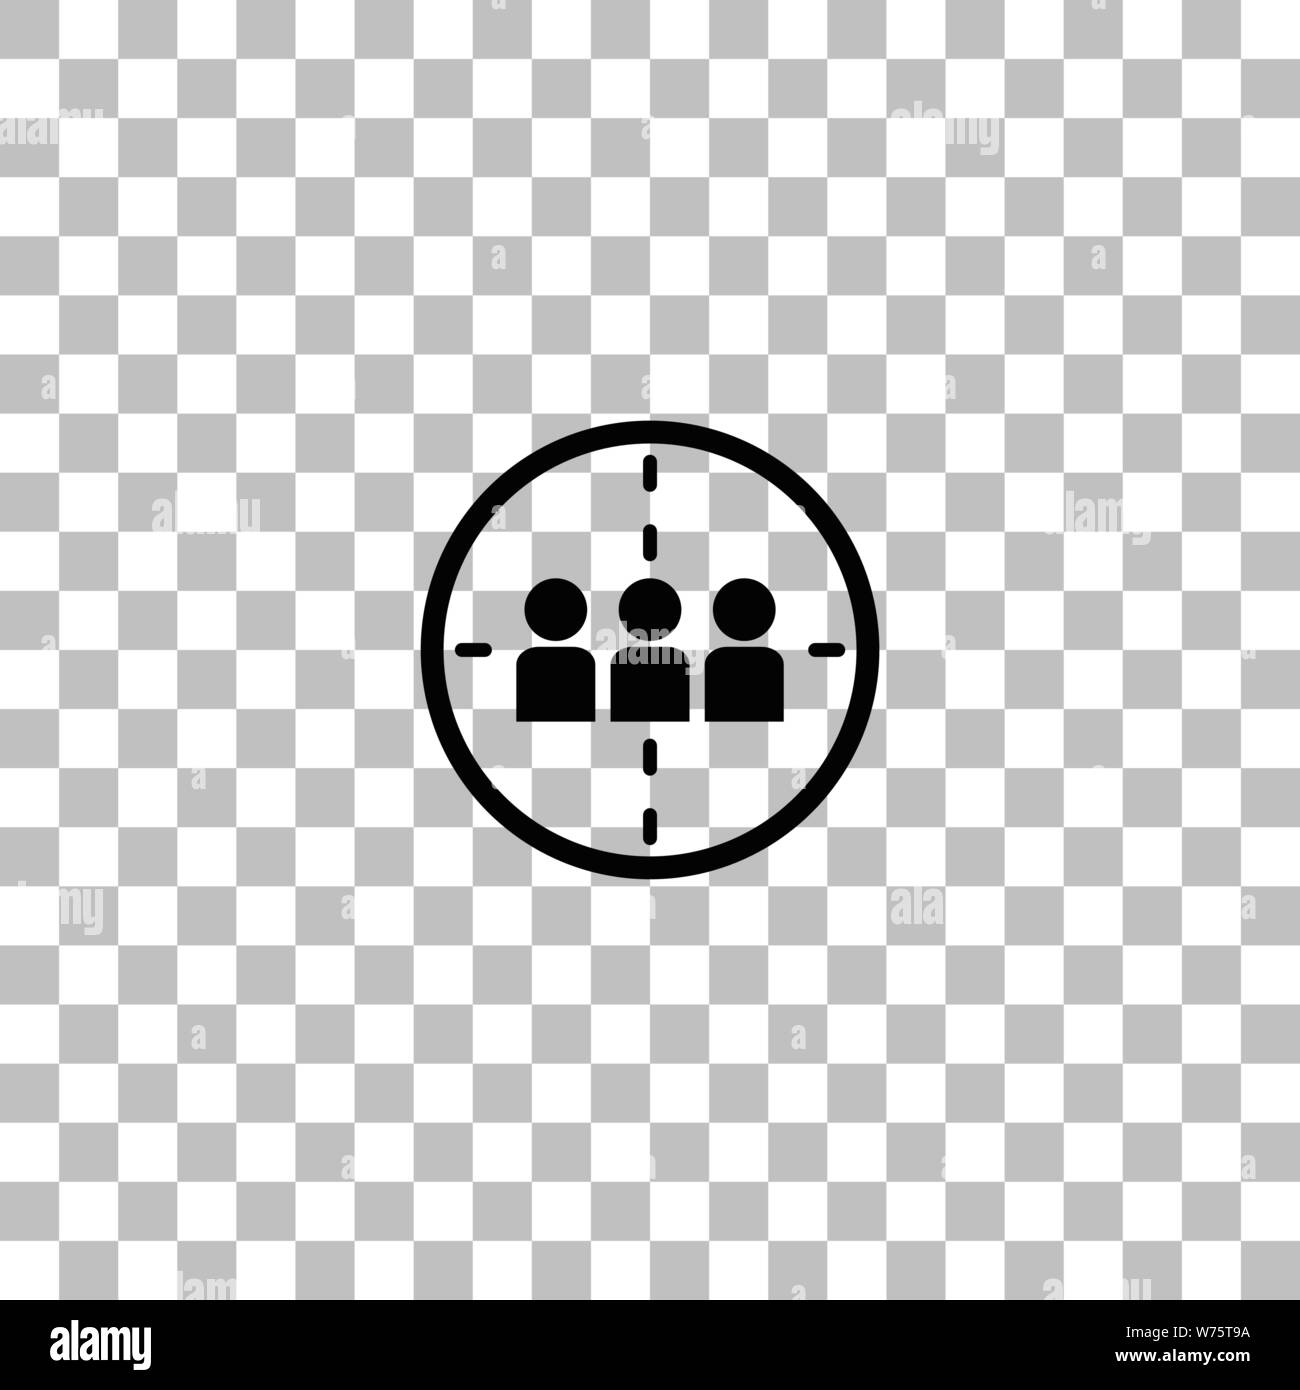 Kill. Black flat icon on a transparent background. Pictogram for your project Stock Vector